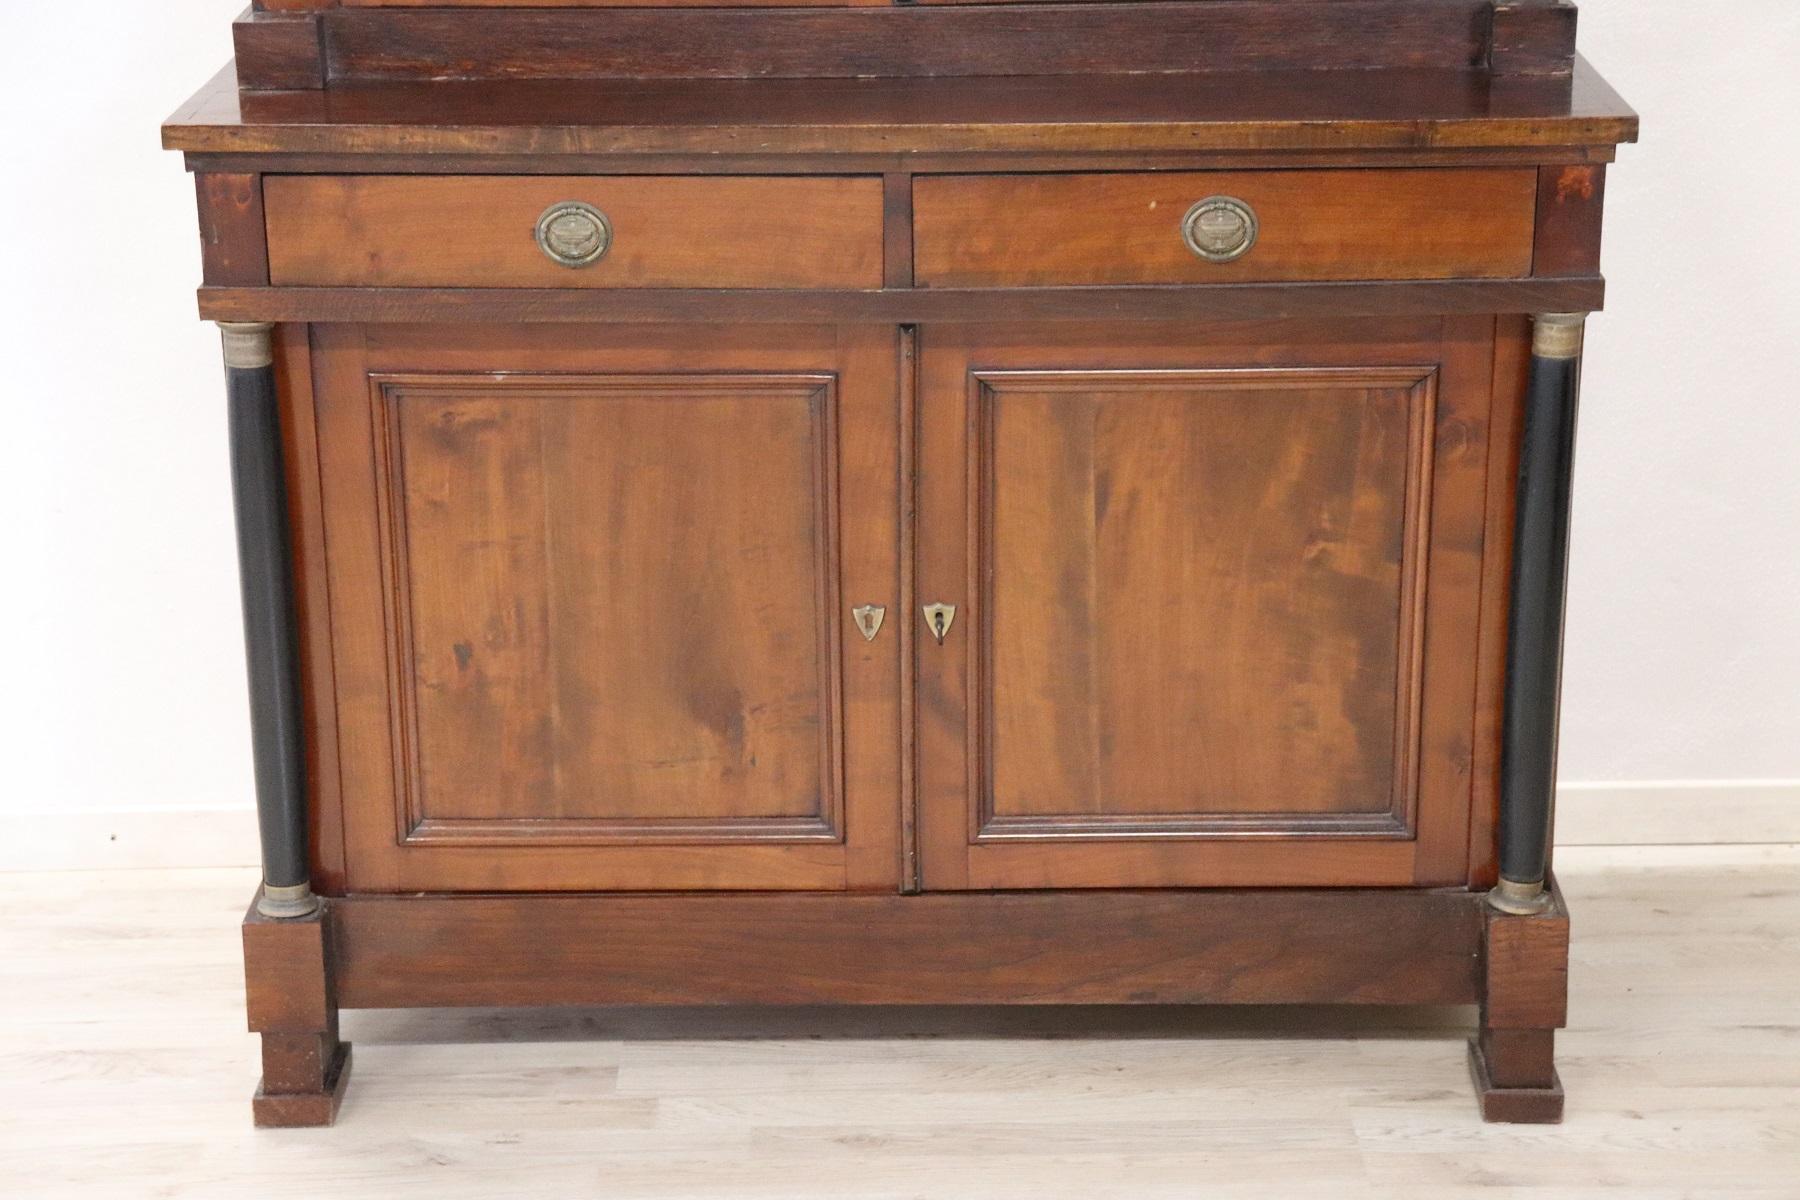 Antique double body sideboard first half of 1800 sec. XIX in solid cherrywood of a beautiful ancient patina! Italian sideboard from the Piedmontese line full Empire era with full ebonized columns the front panels are presented squared in the upper